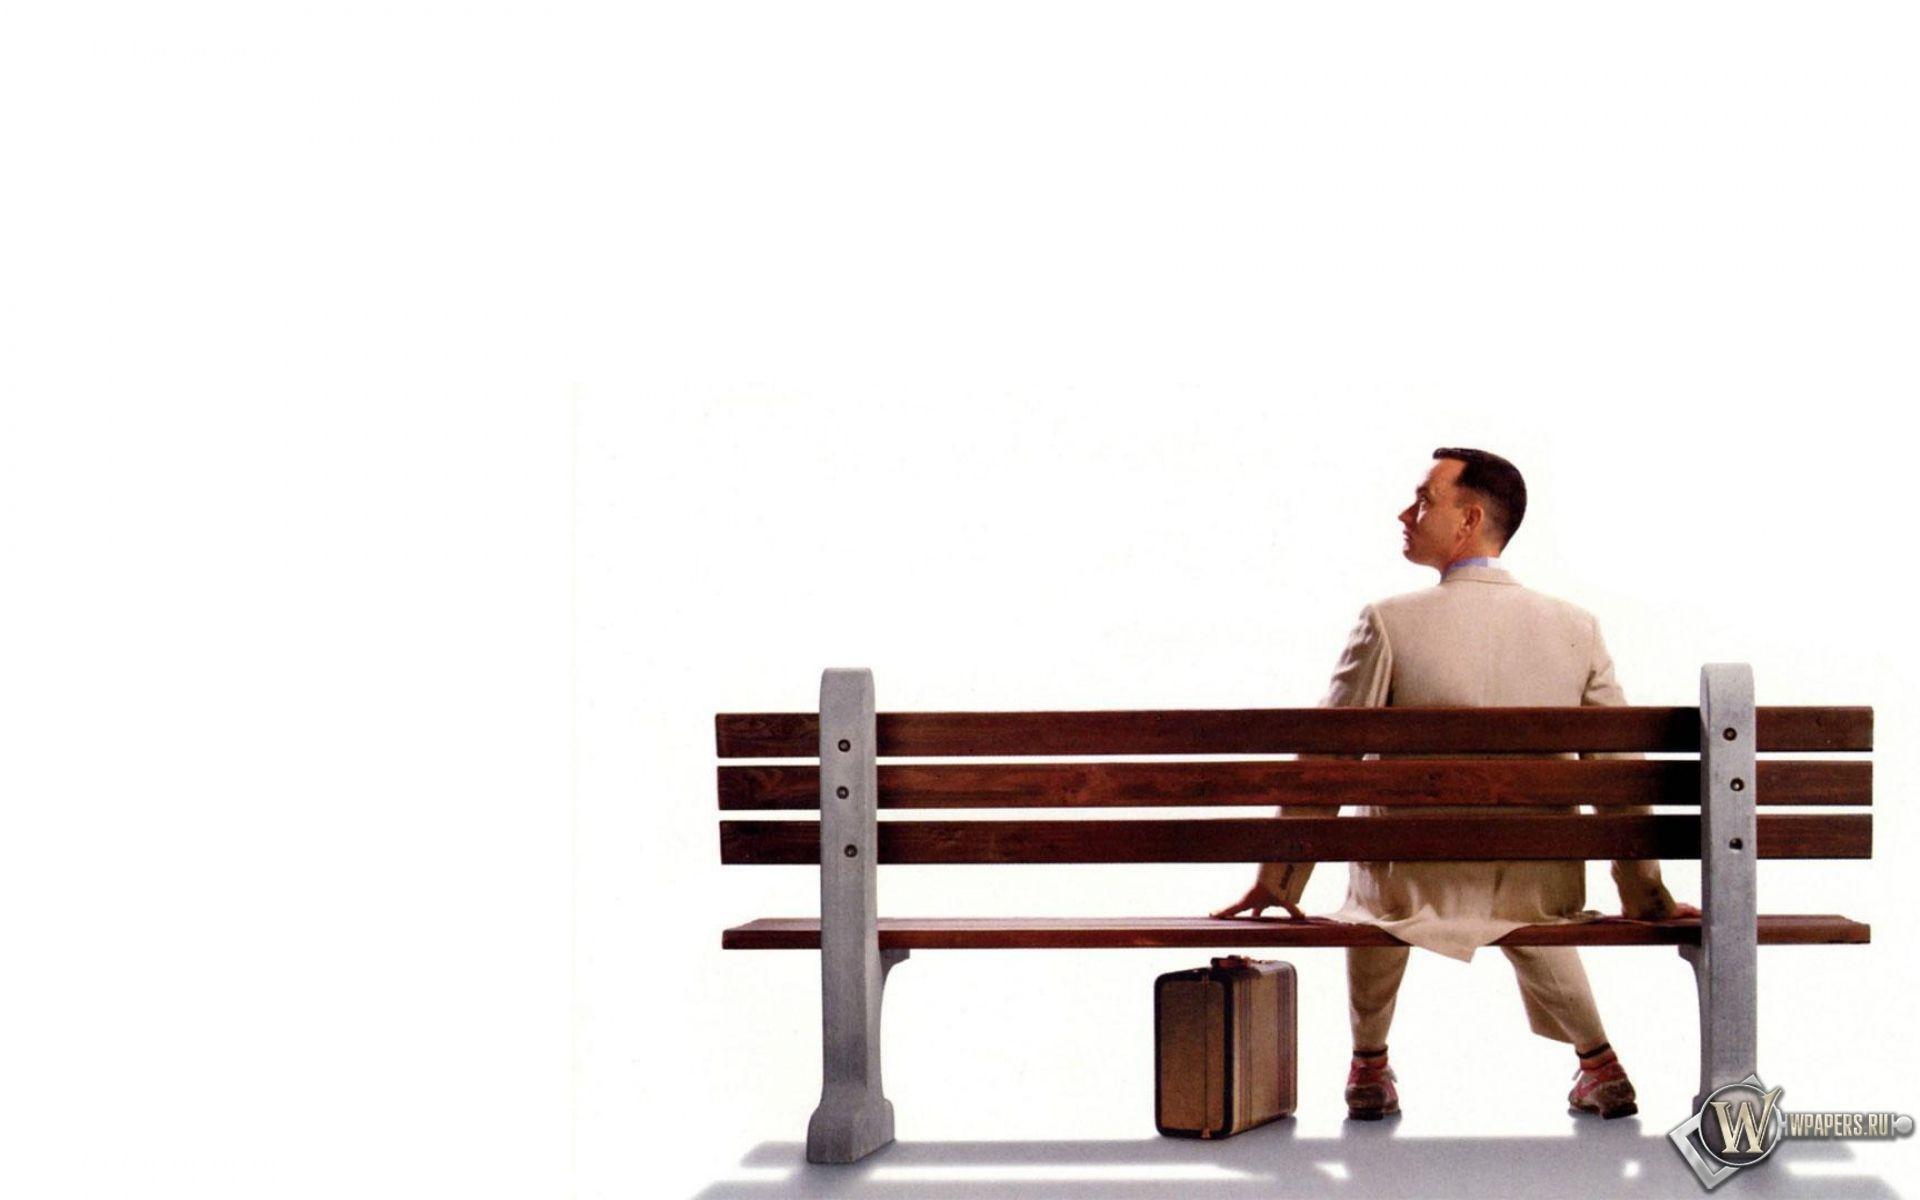 Forrest Gump wallpaper and image, picture, photo